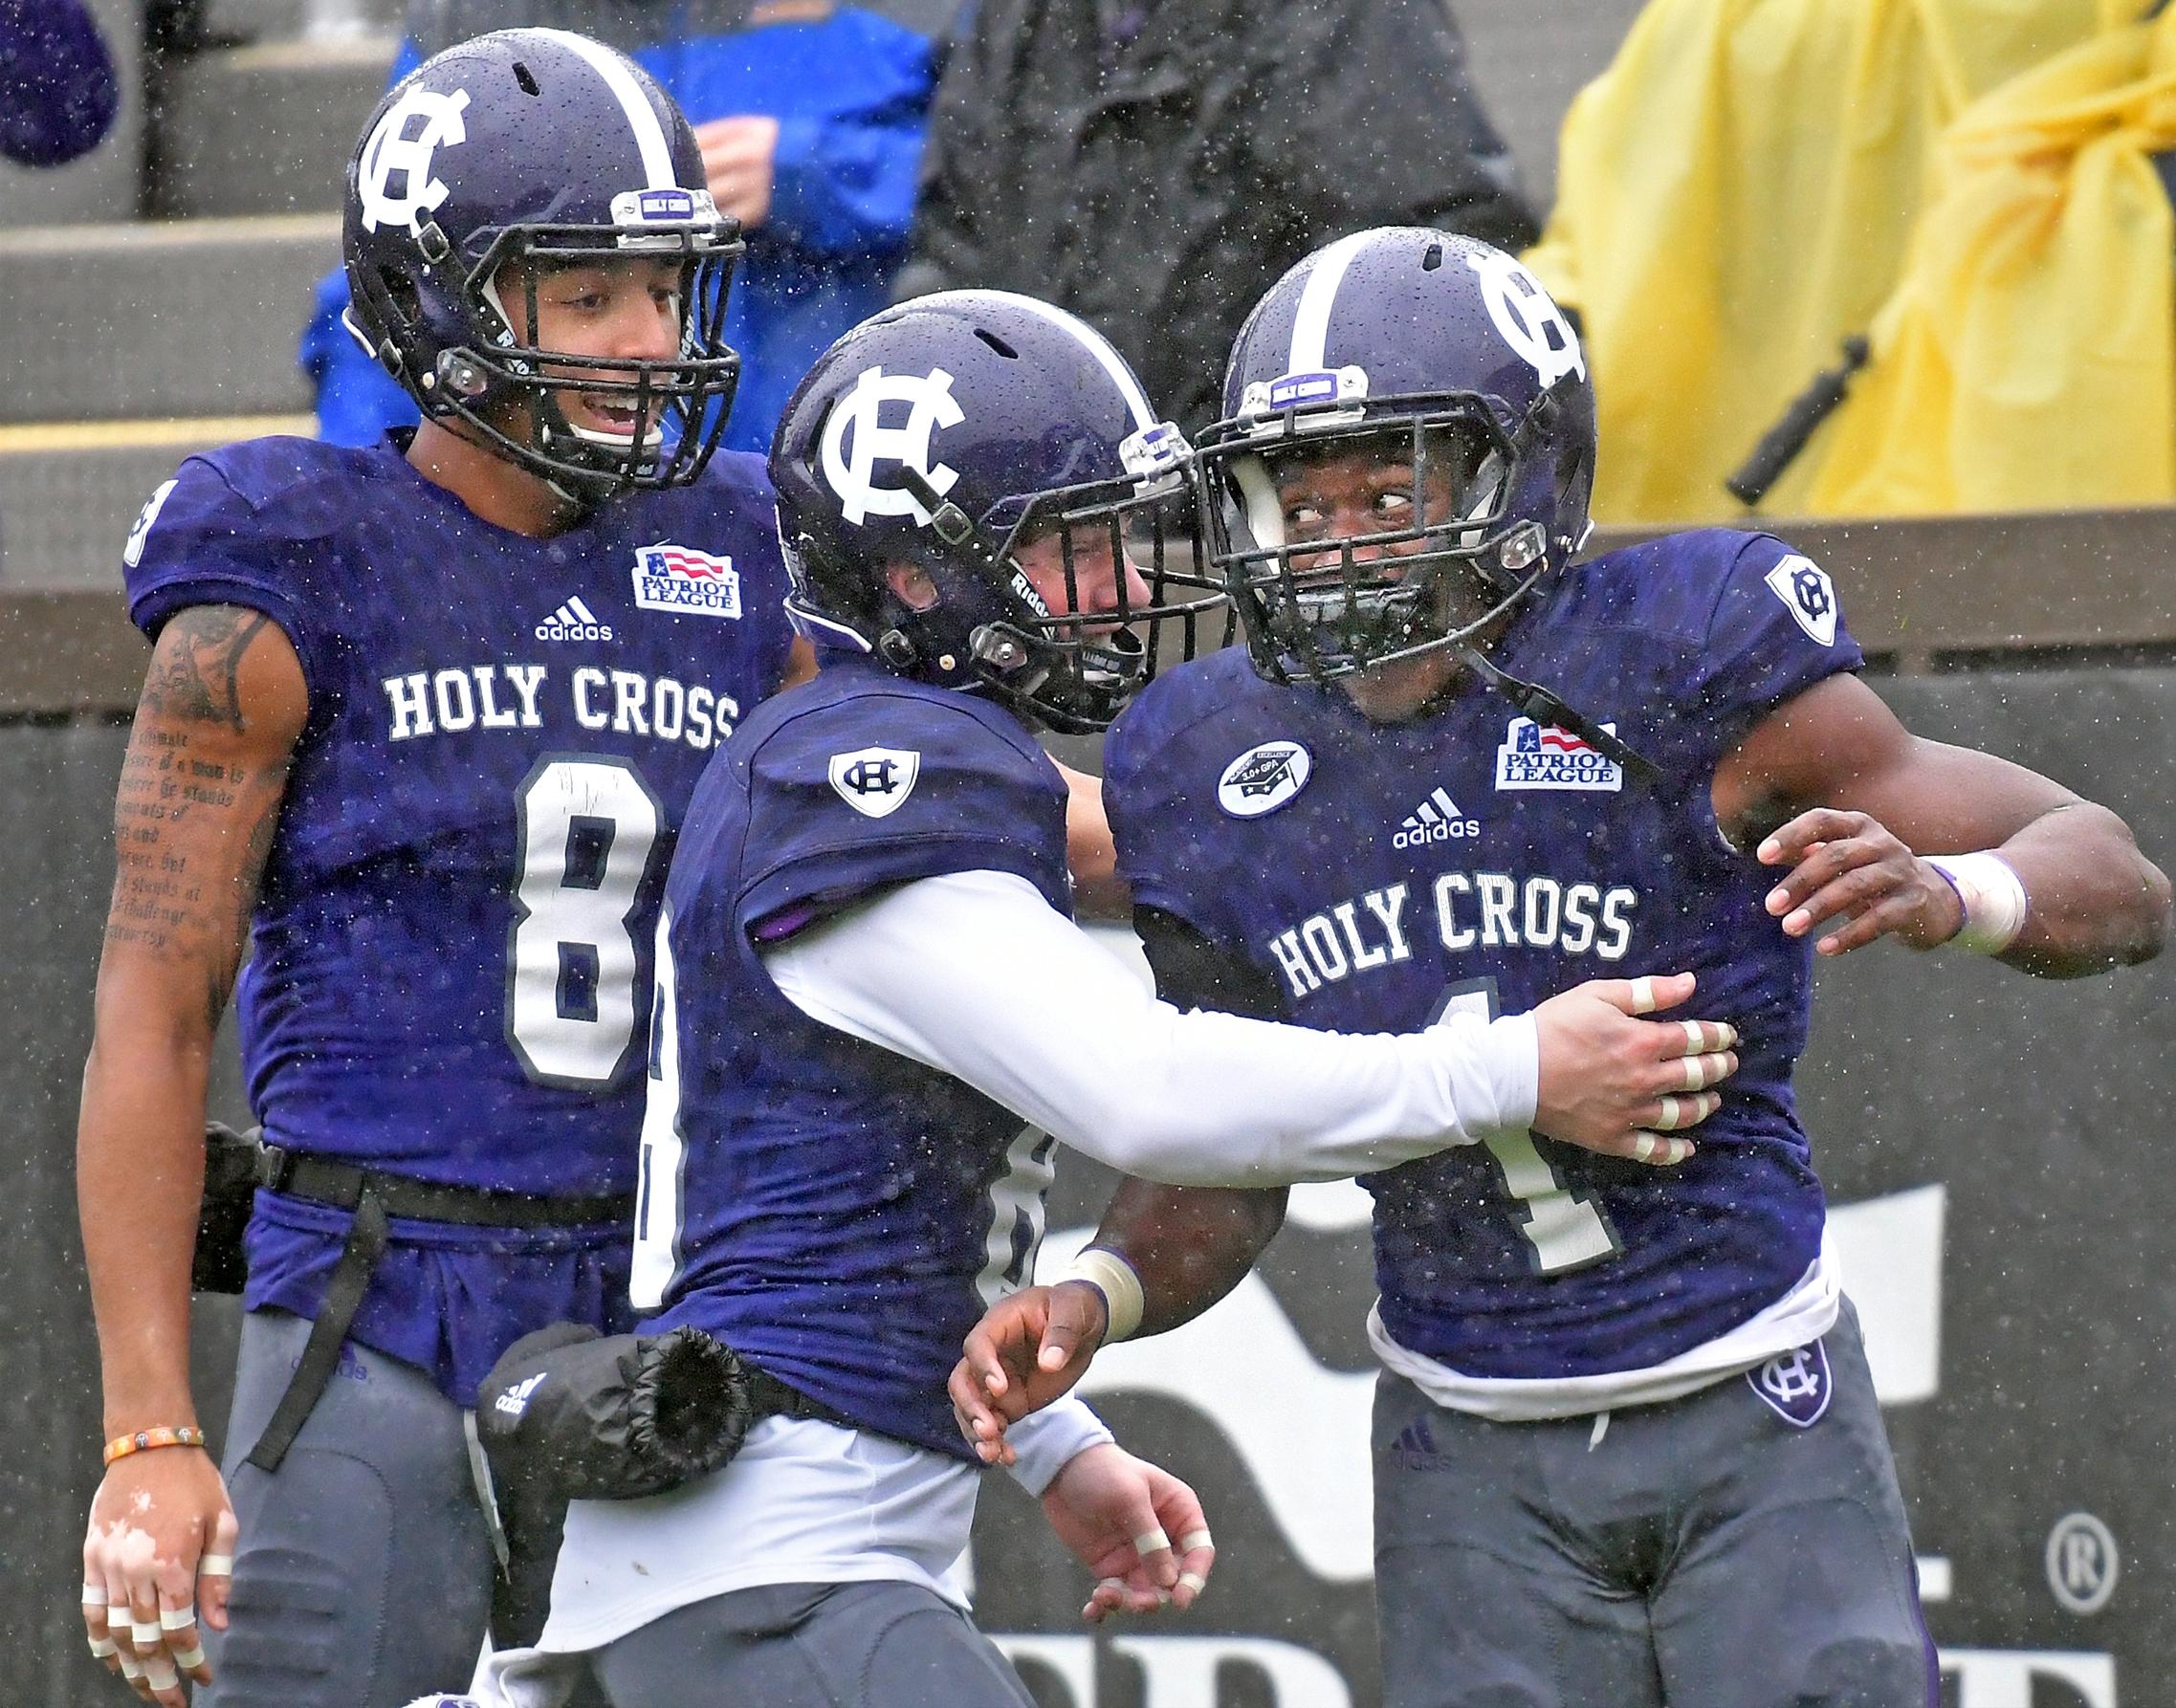 Football Climbs to Highest-Ever Ranking in Patriot League Era